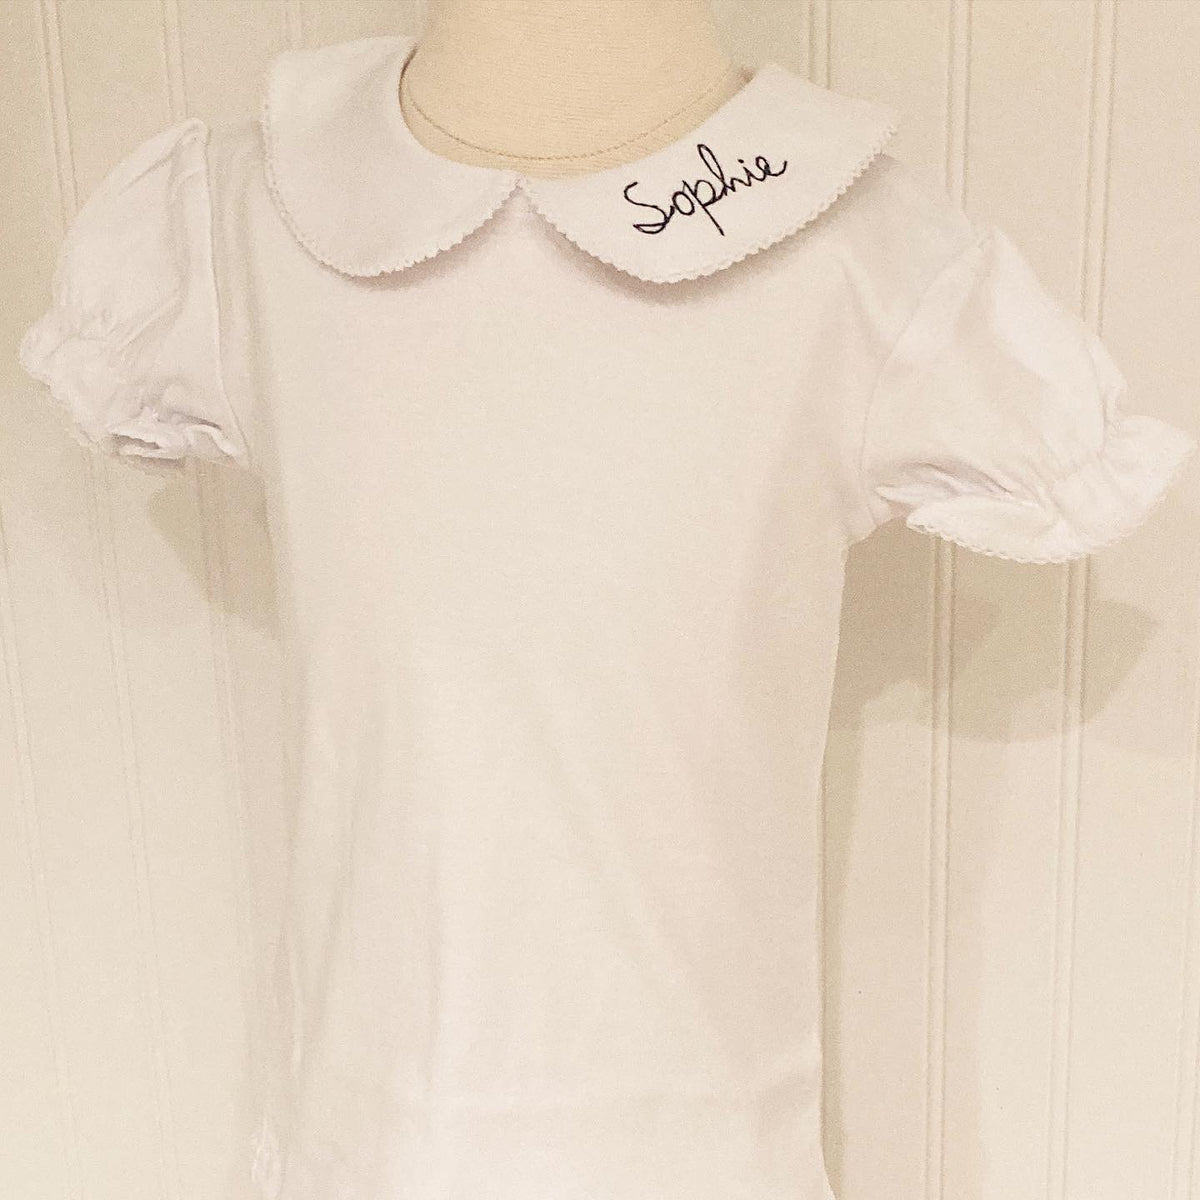 PETER PAN COLLAR SHIRT SHORT SLEEVE Southern Sorelle Embroidery Boutique